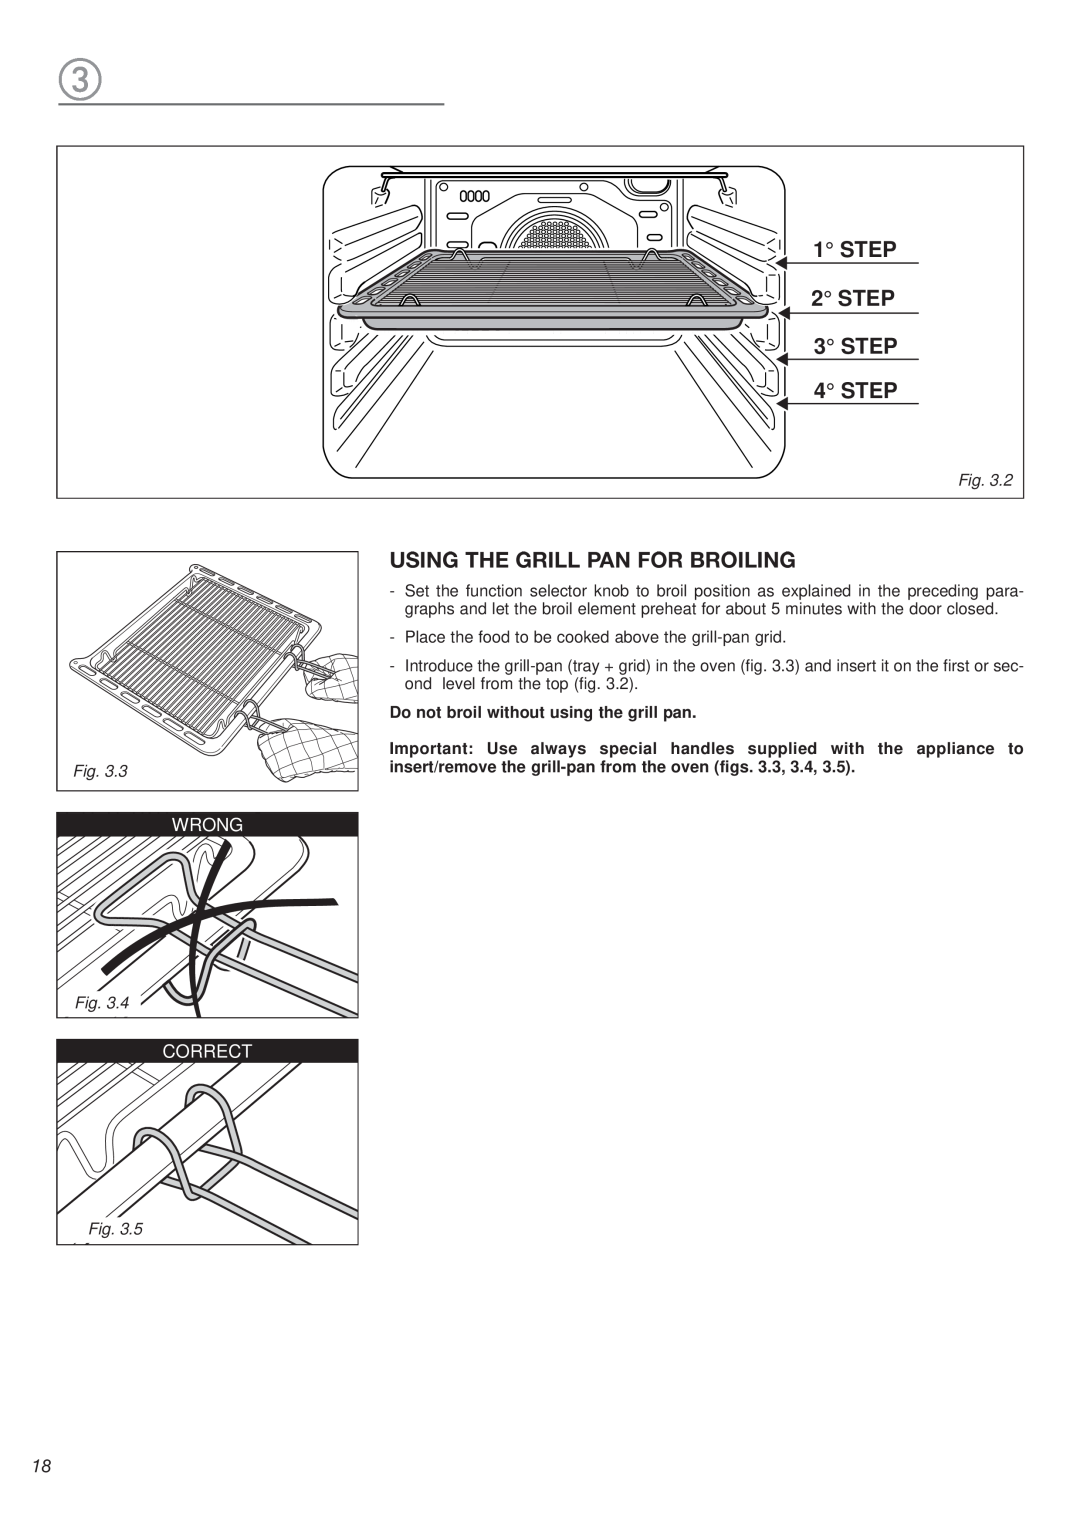 Avanti DGE 2403 SC Step, Using The Grill Pan For Broiling, Wrong, Correct, Do not broil without using the grill pan 